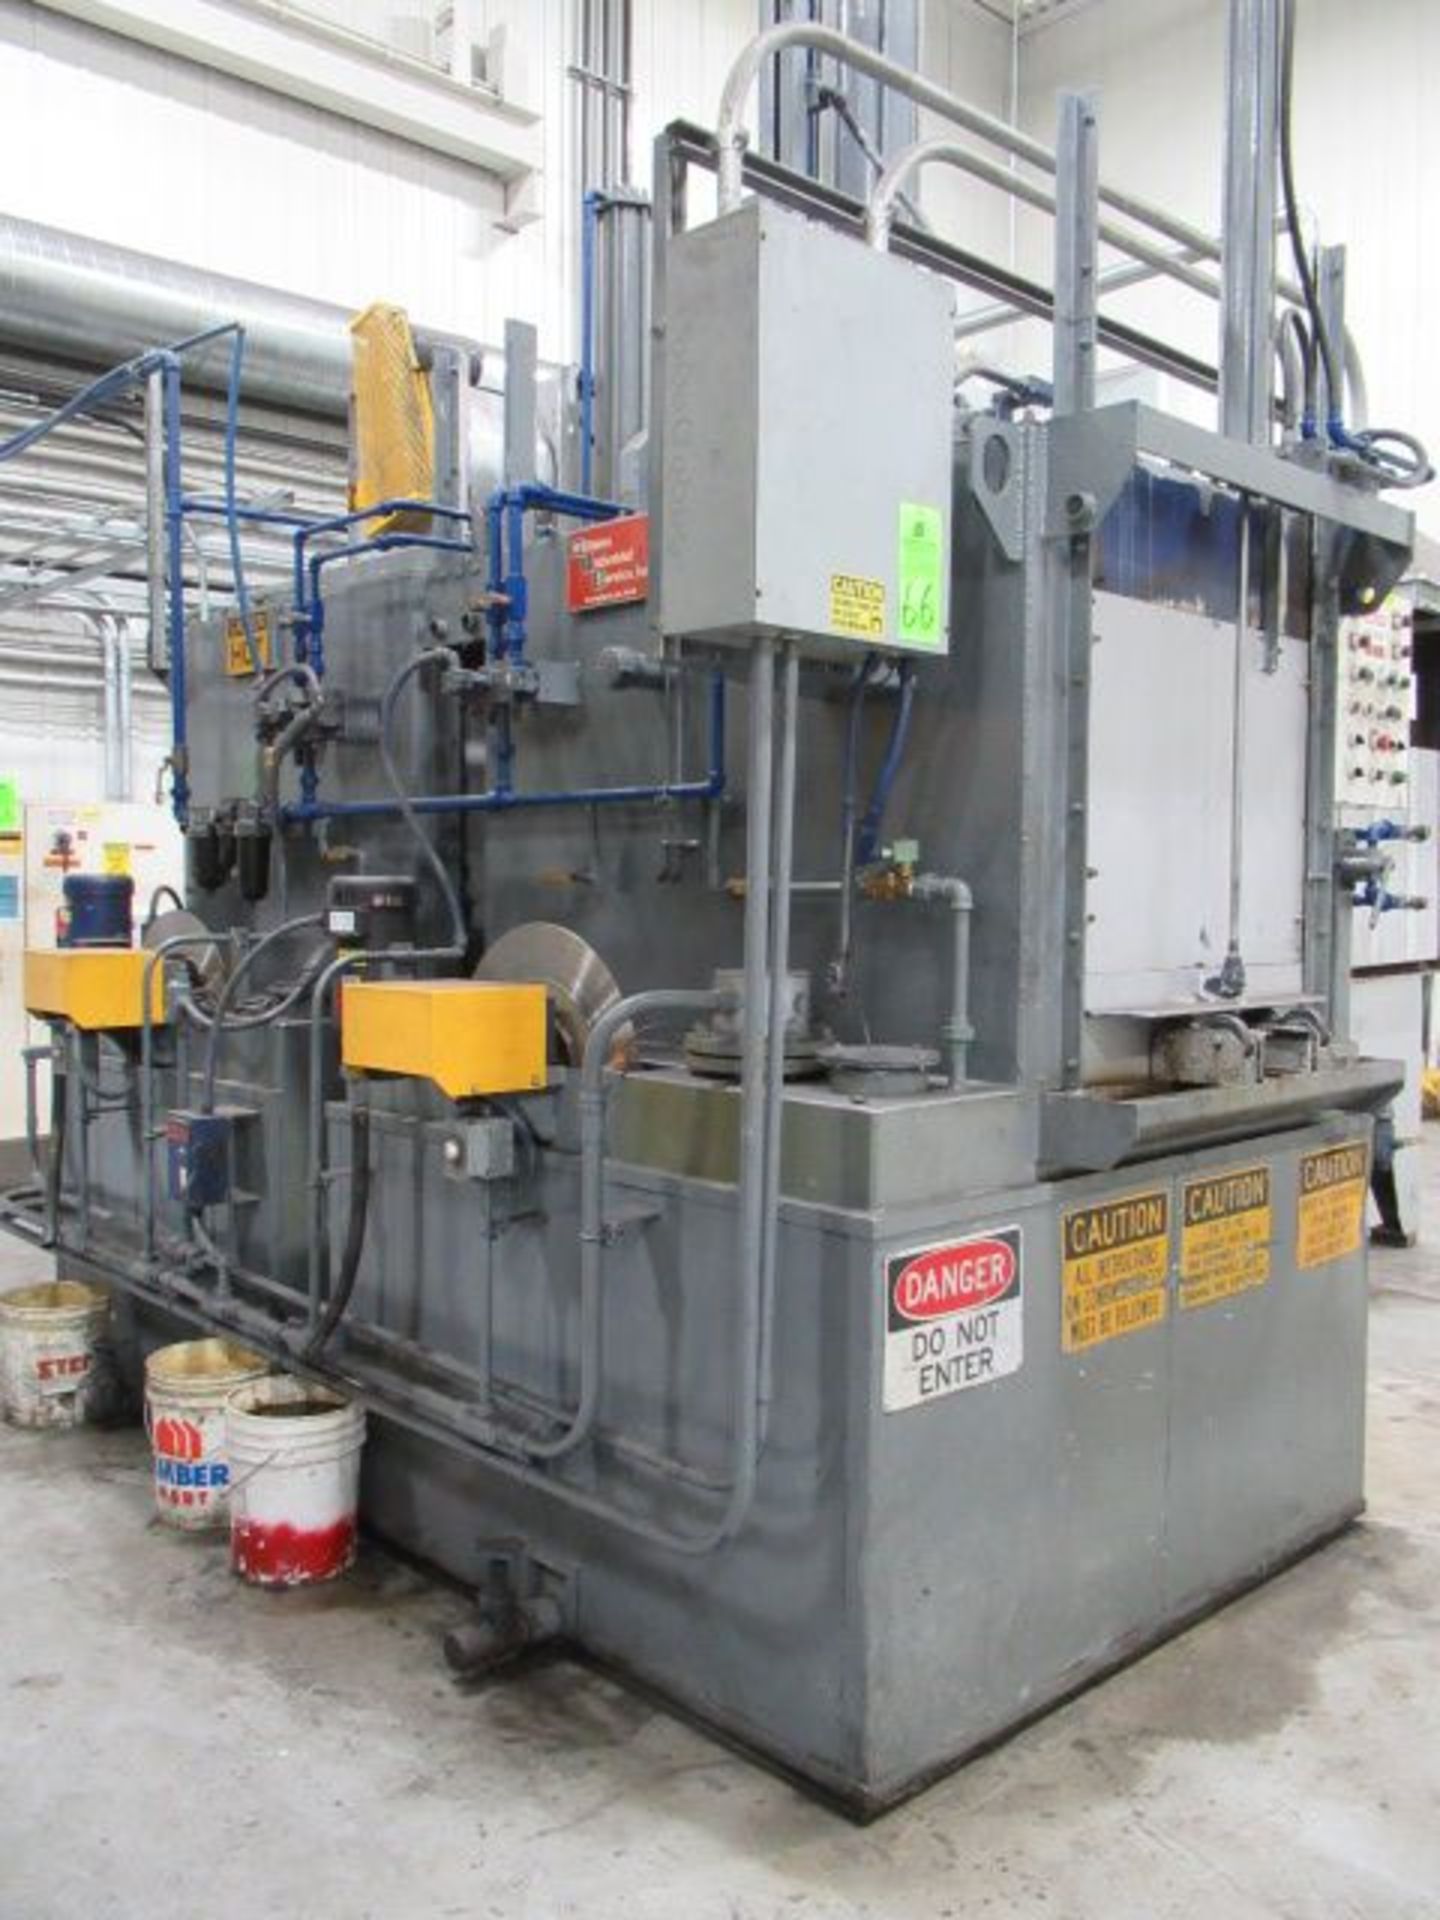 1999 SURFACE COMBUSTION WILLIAMS Pre/Post Carburizing 2 Stage Wash System, s/n 02498, w/ 24”x36” - Image 3 of 4